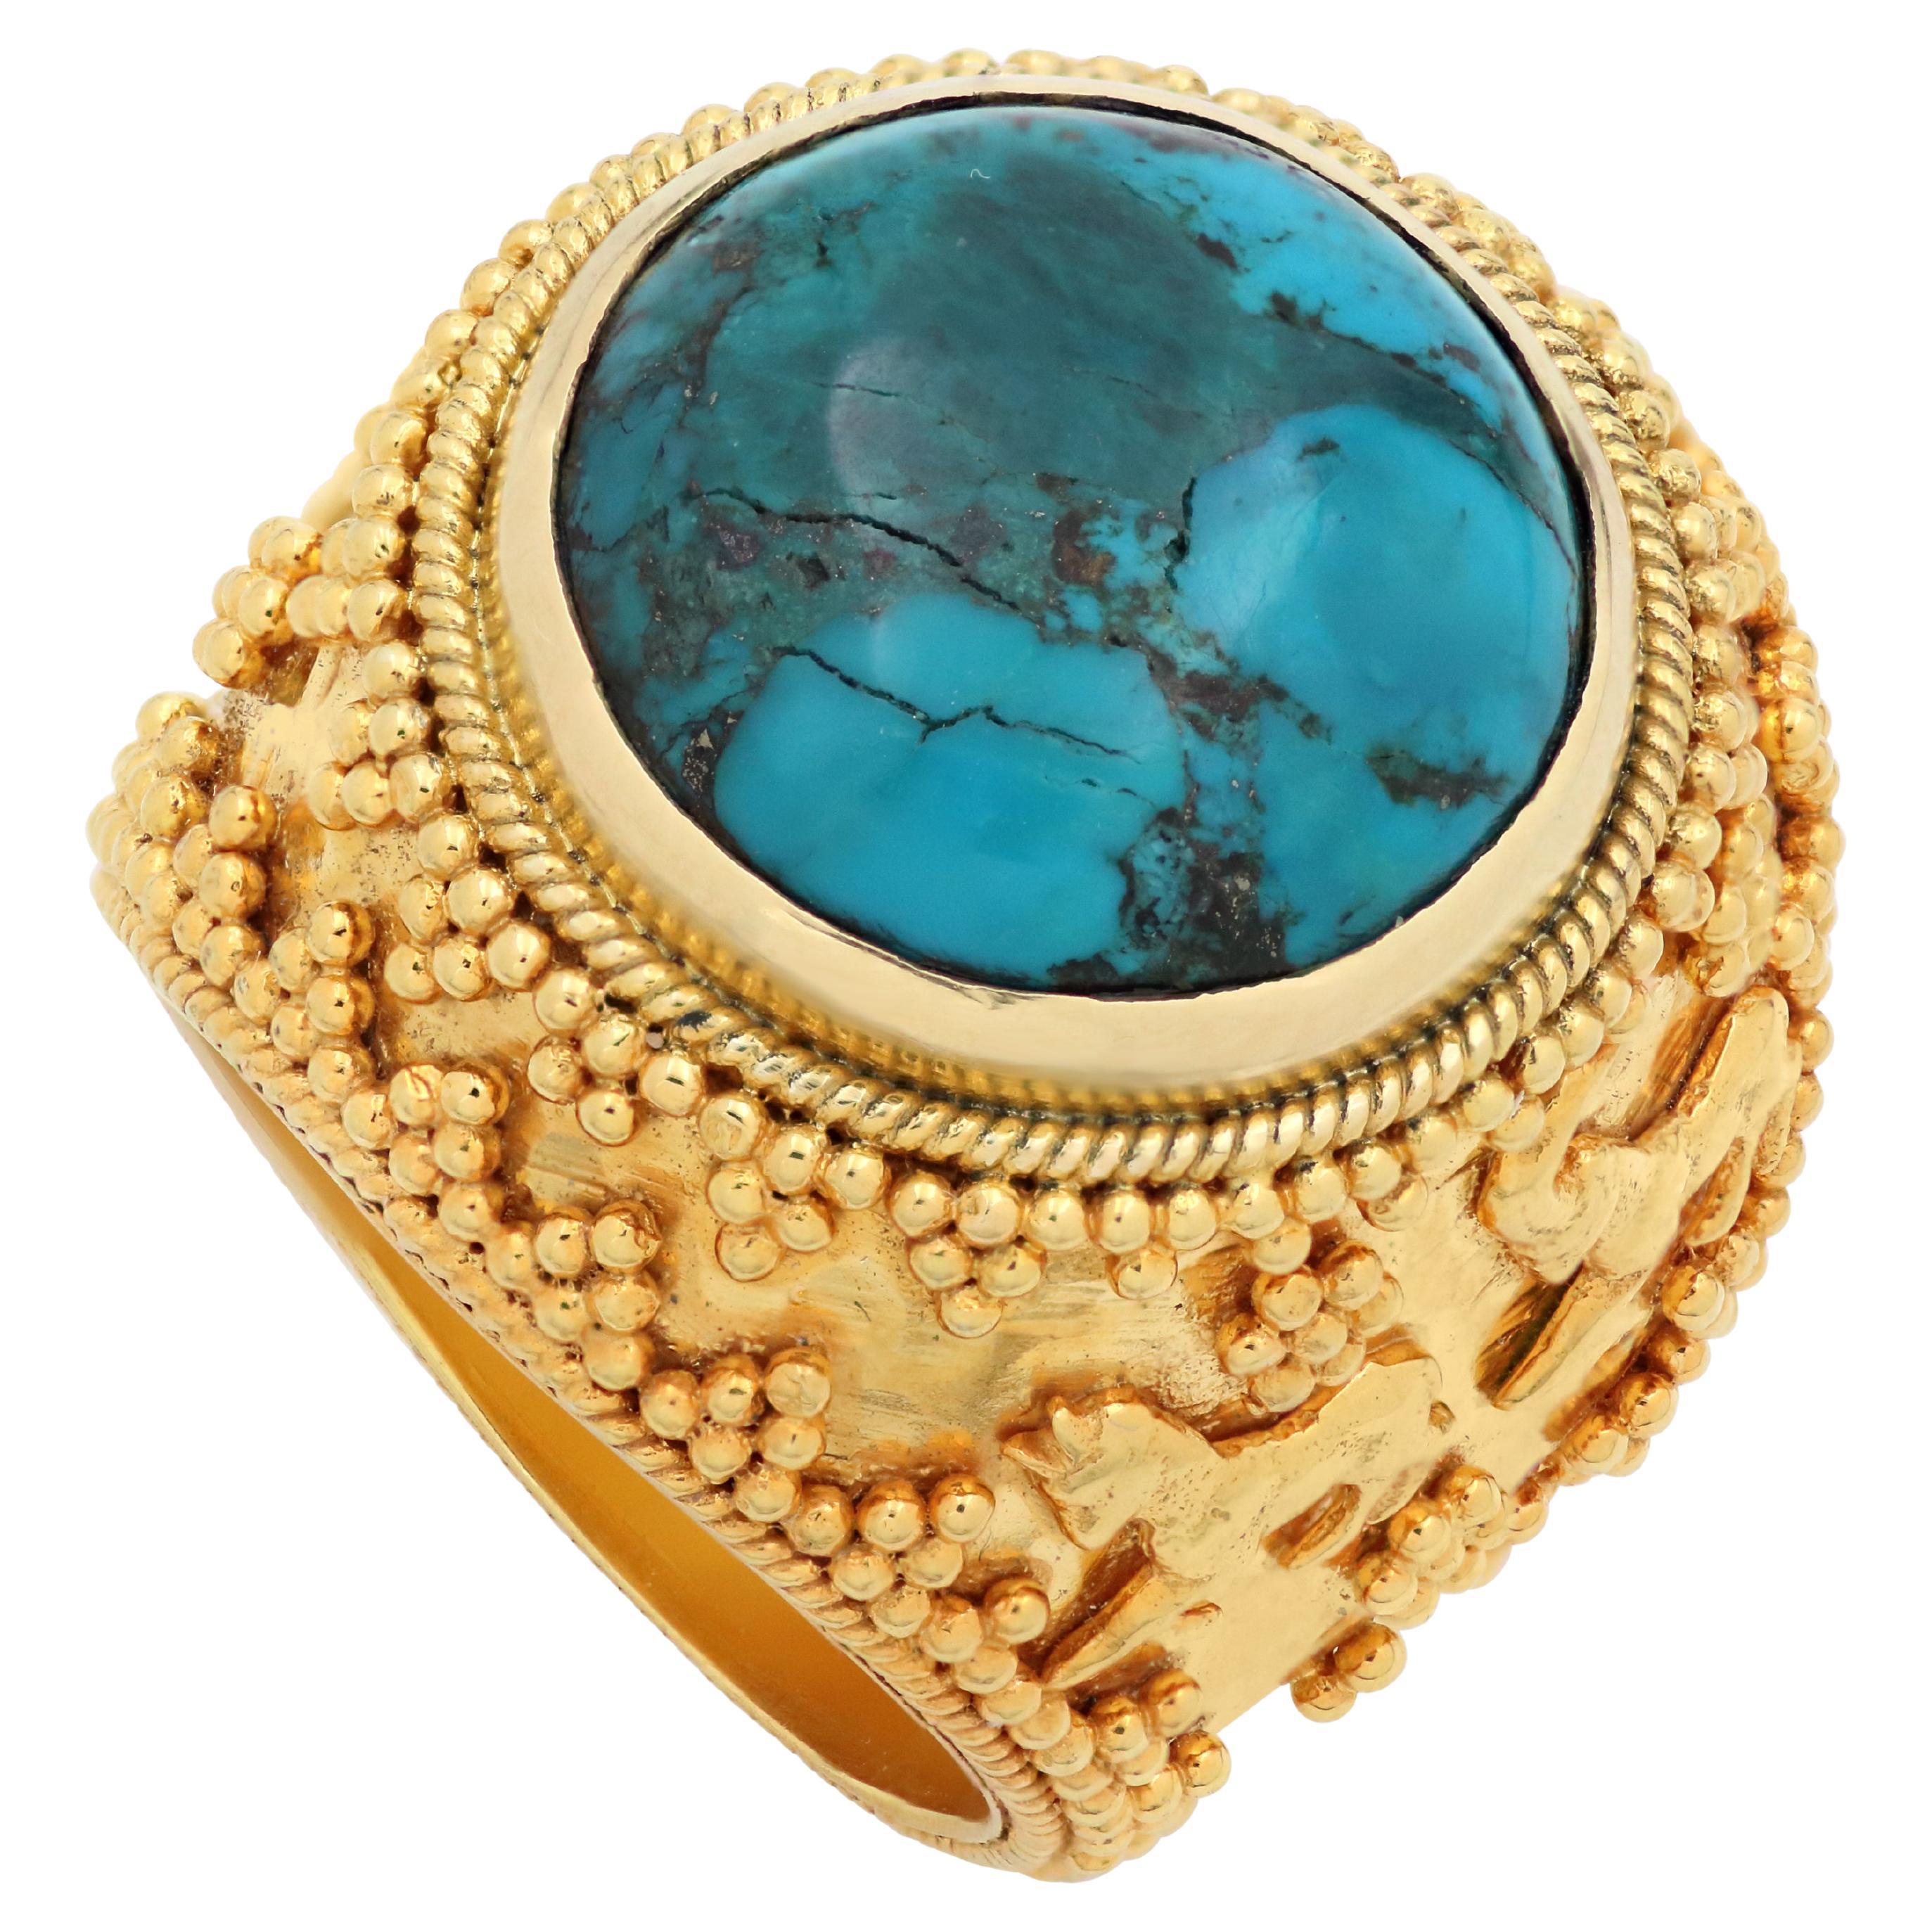 Dimos 18k Gold Turquoise Dome Ring with Kri Kri Goats